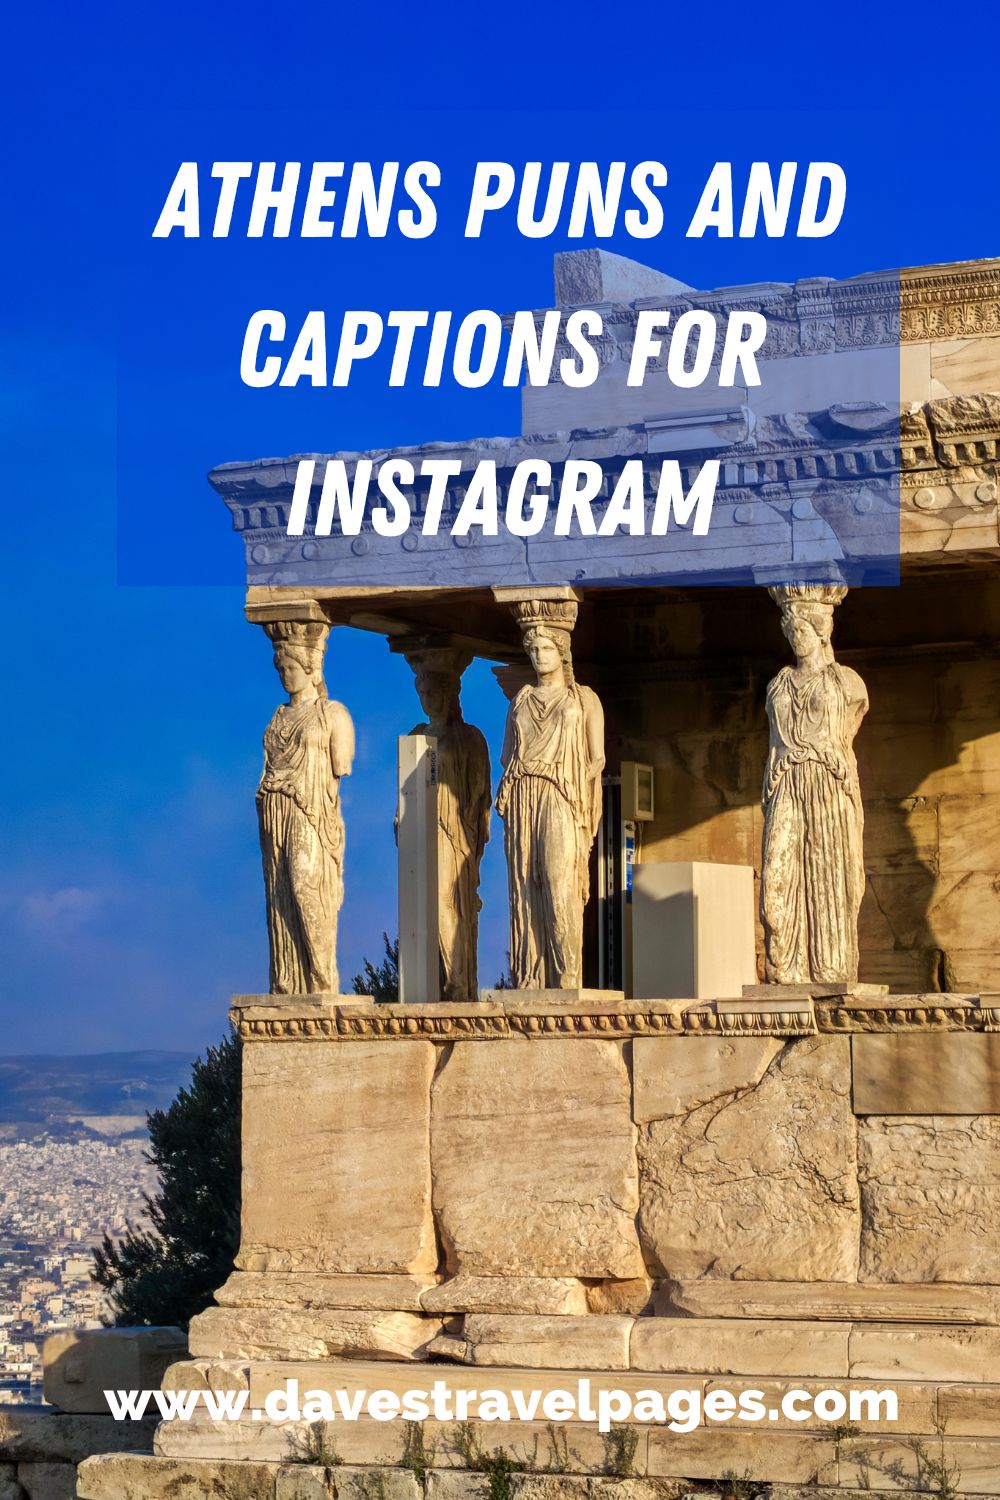 Athens Puns and Captions for Instagram by Dave's Travel Pages